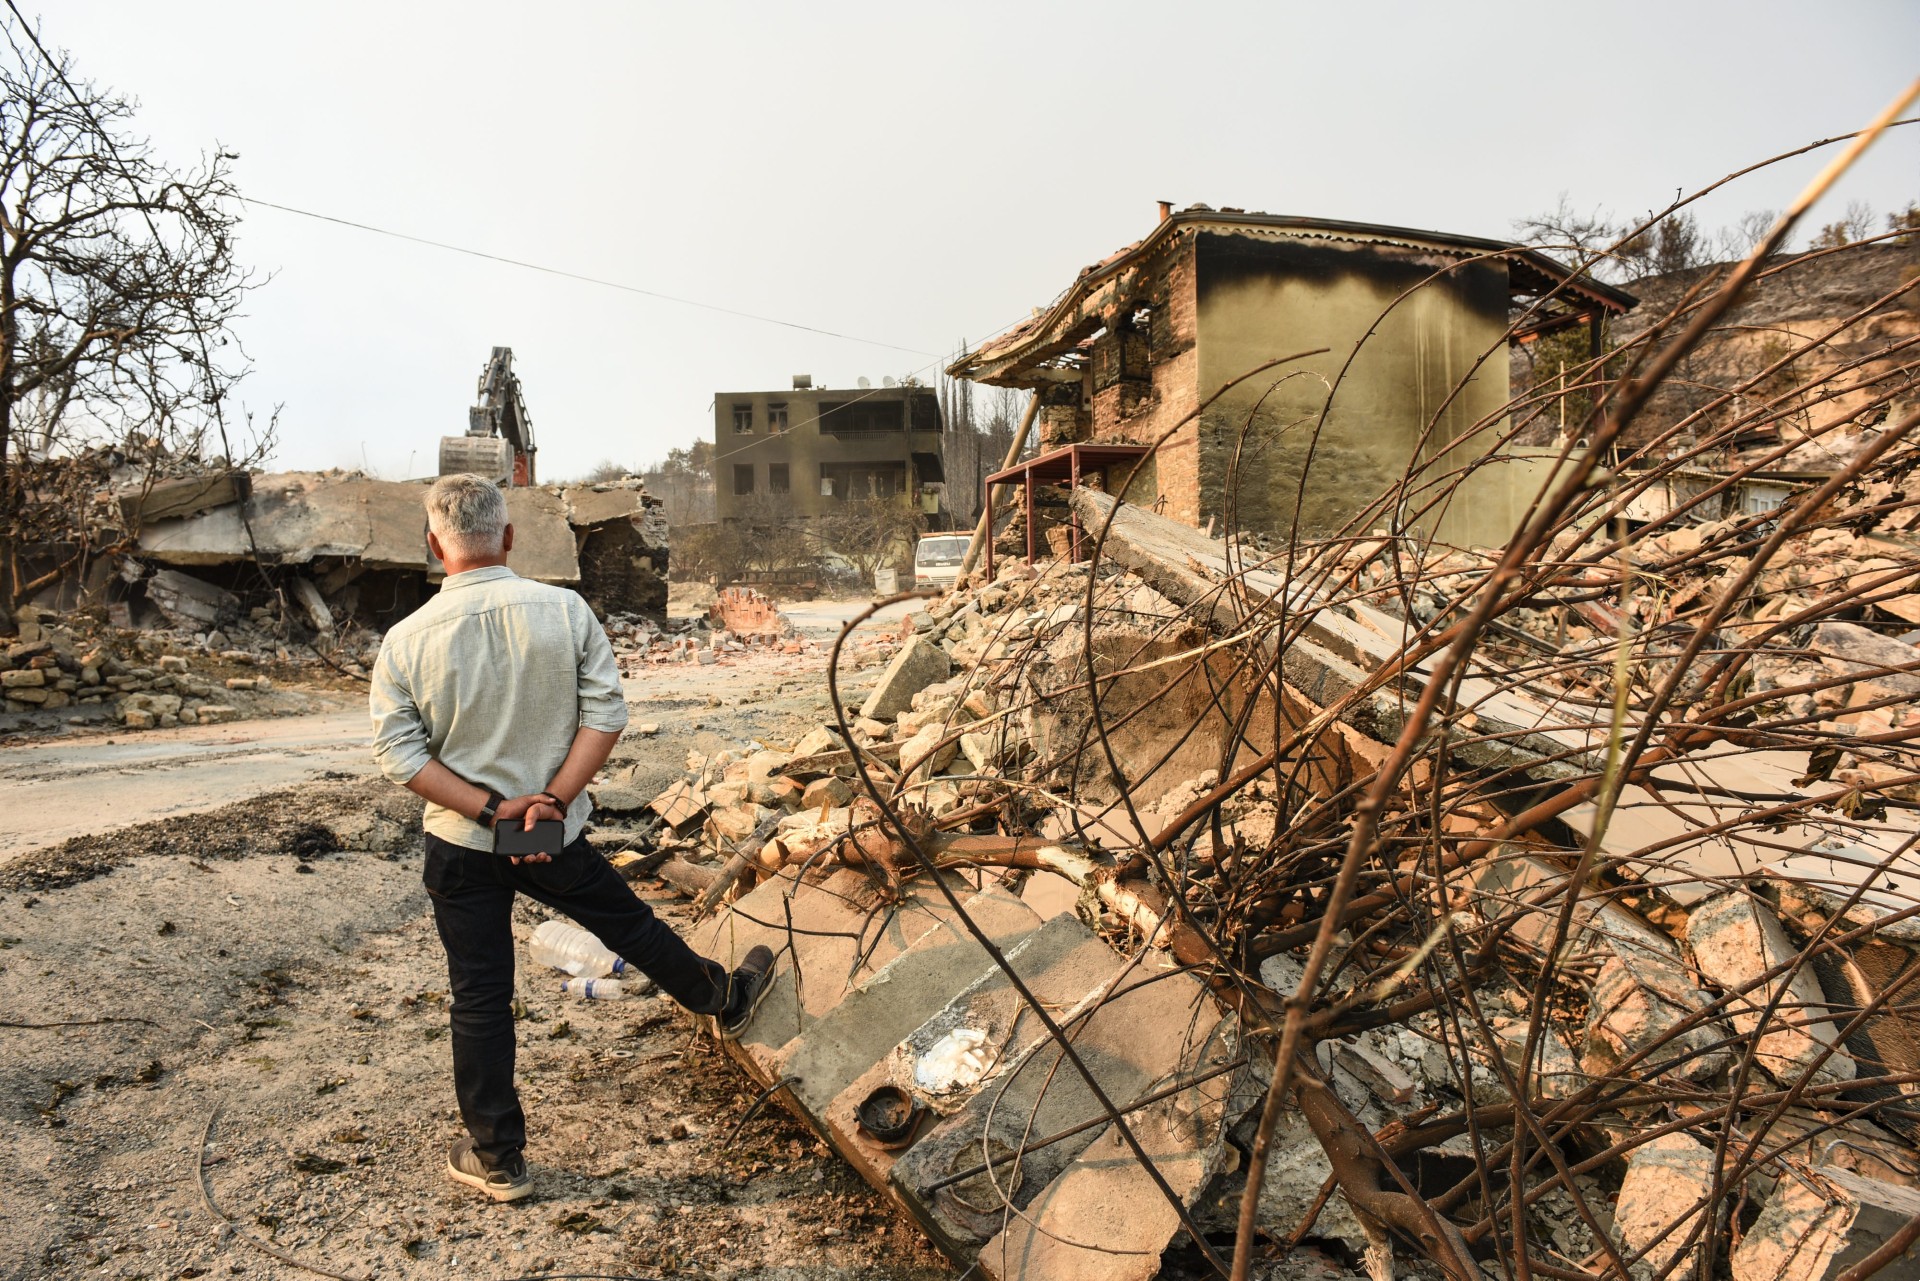 A man looks at his burned house while standing in front of the rubble of another house (MEE/Yusuf Selman İnanc)